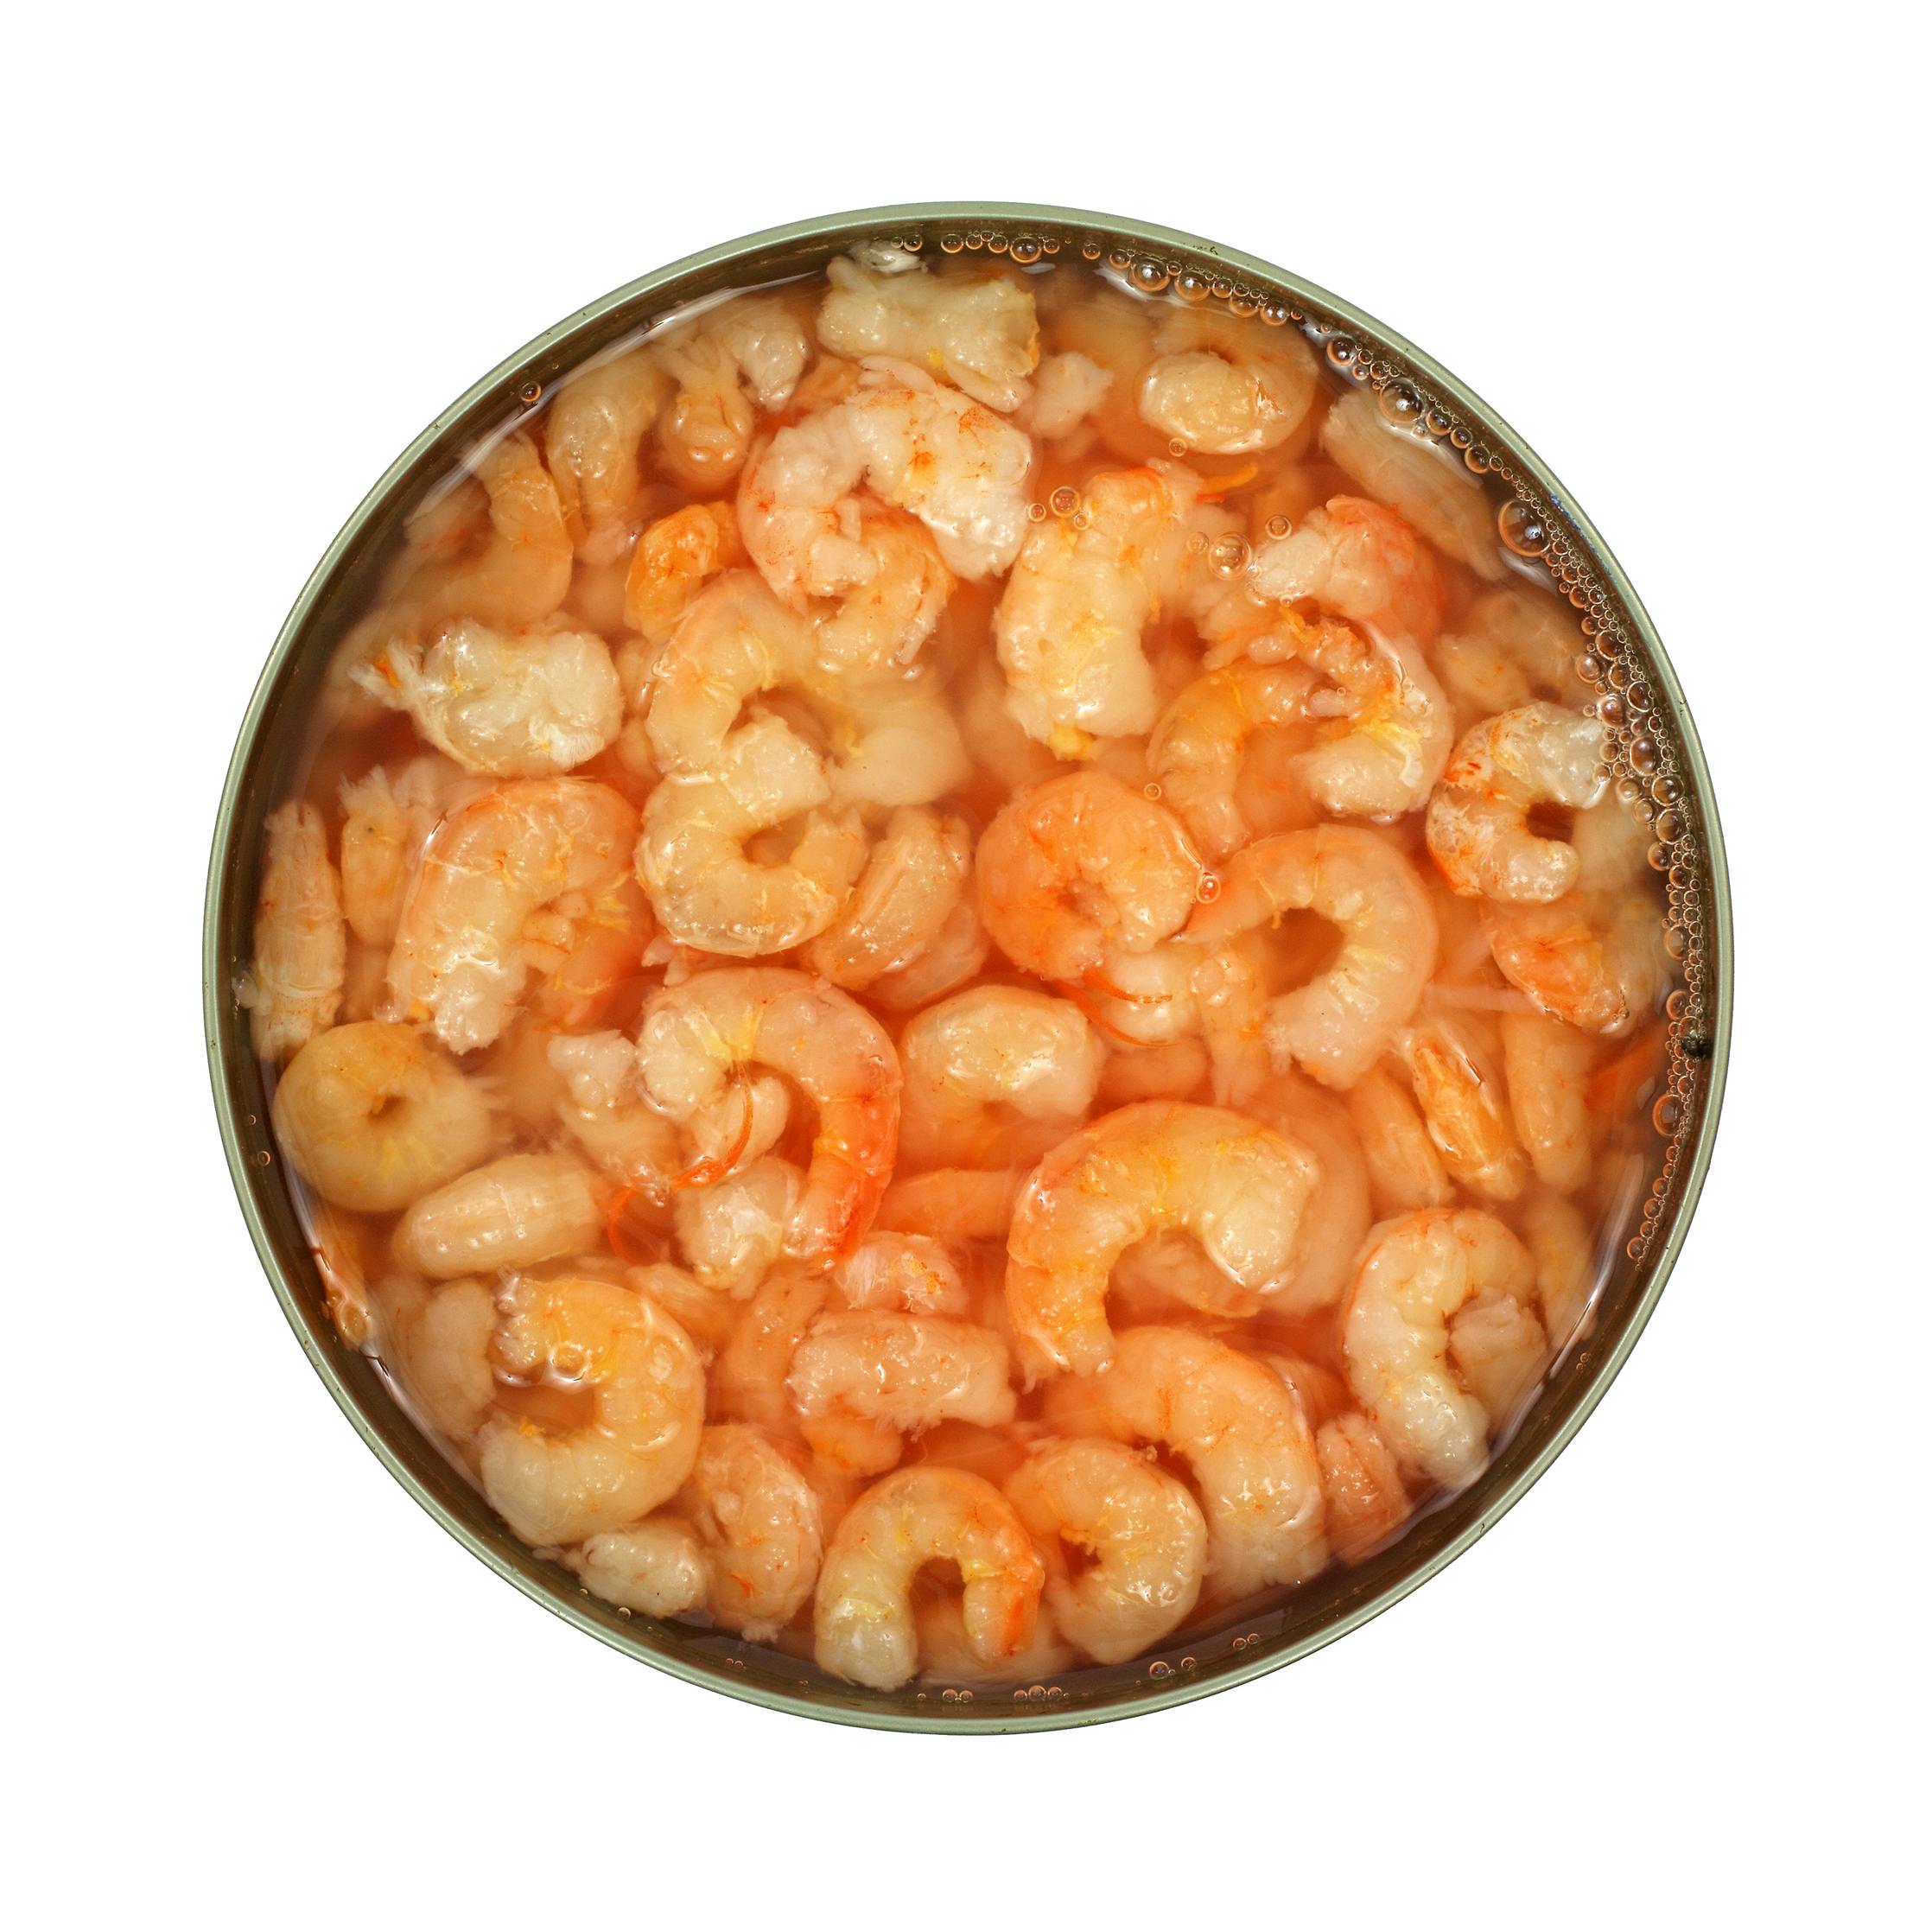 Spoilage Risk Leads to Canned Shrimp Recall